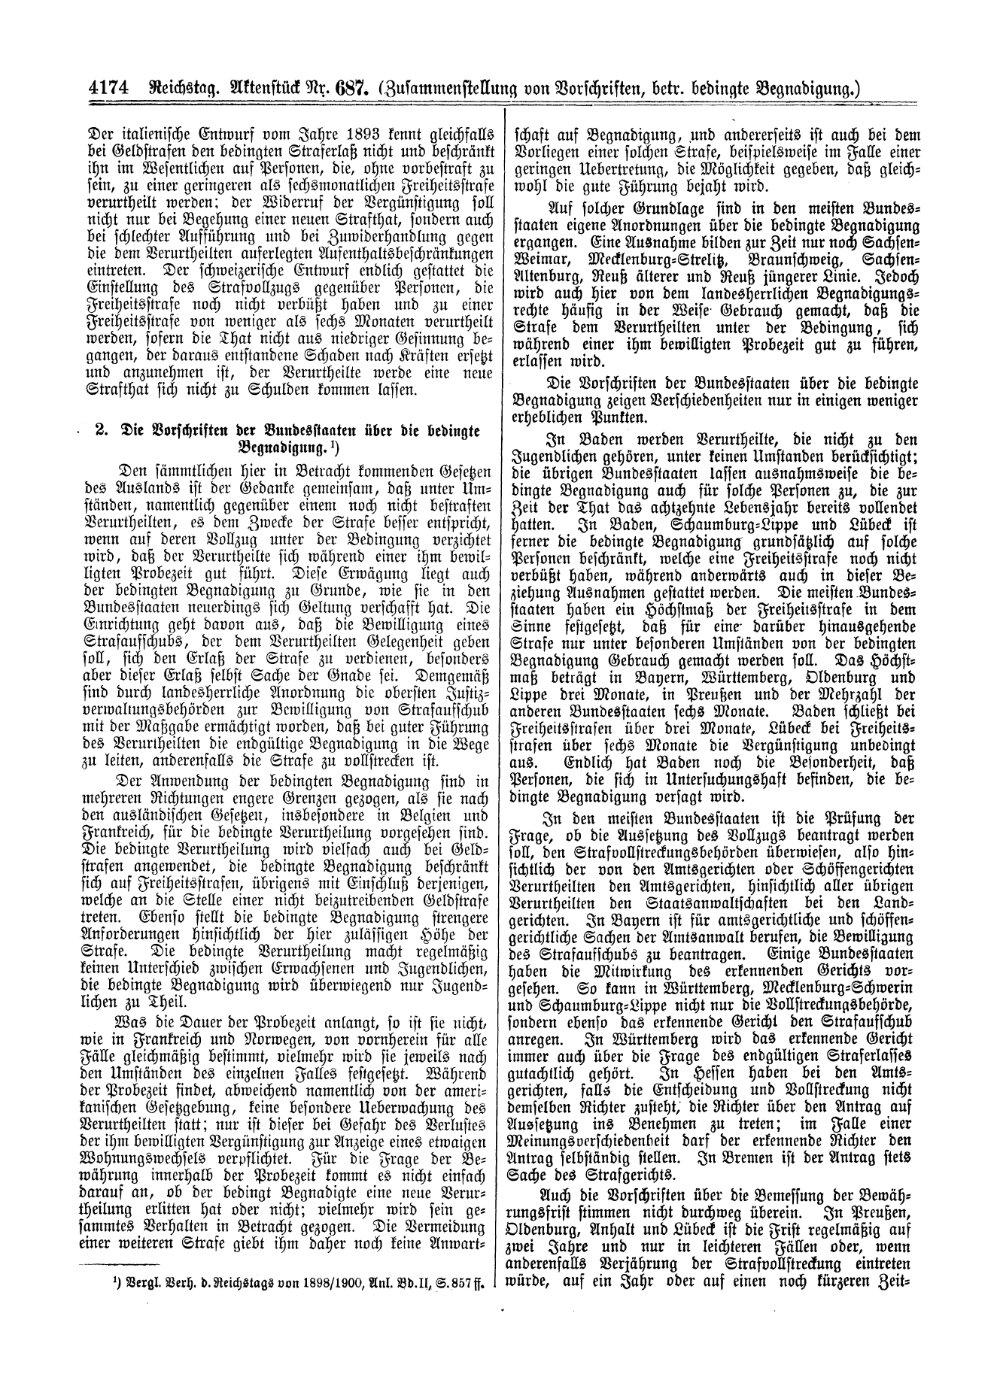 Scan of page 4174